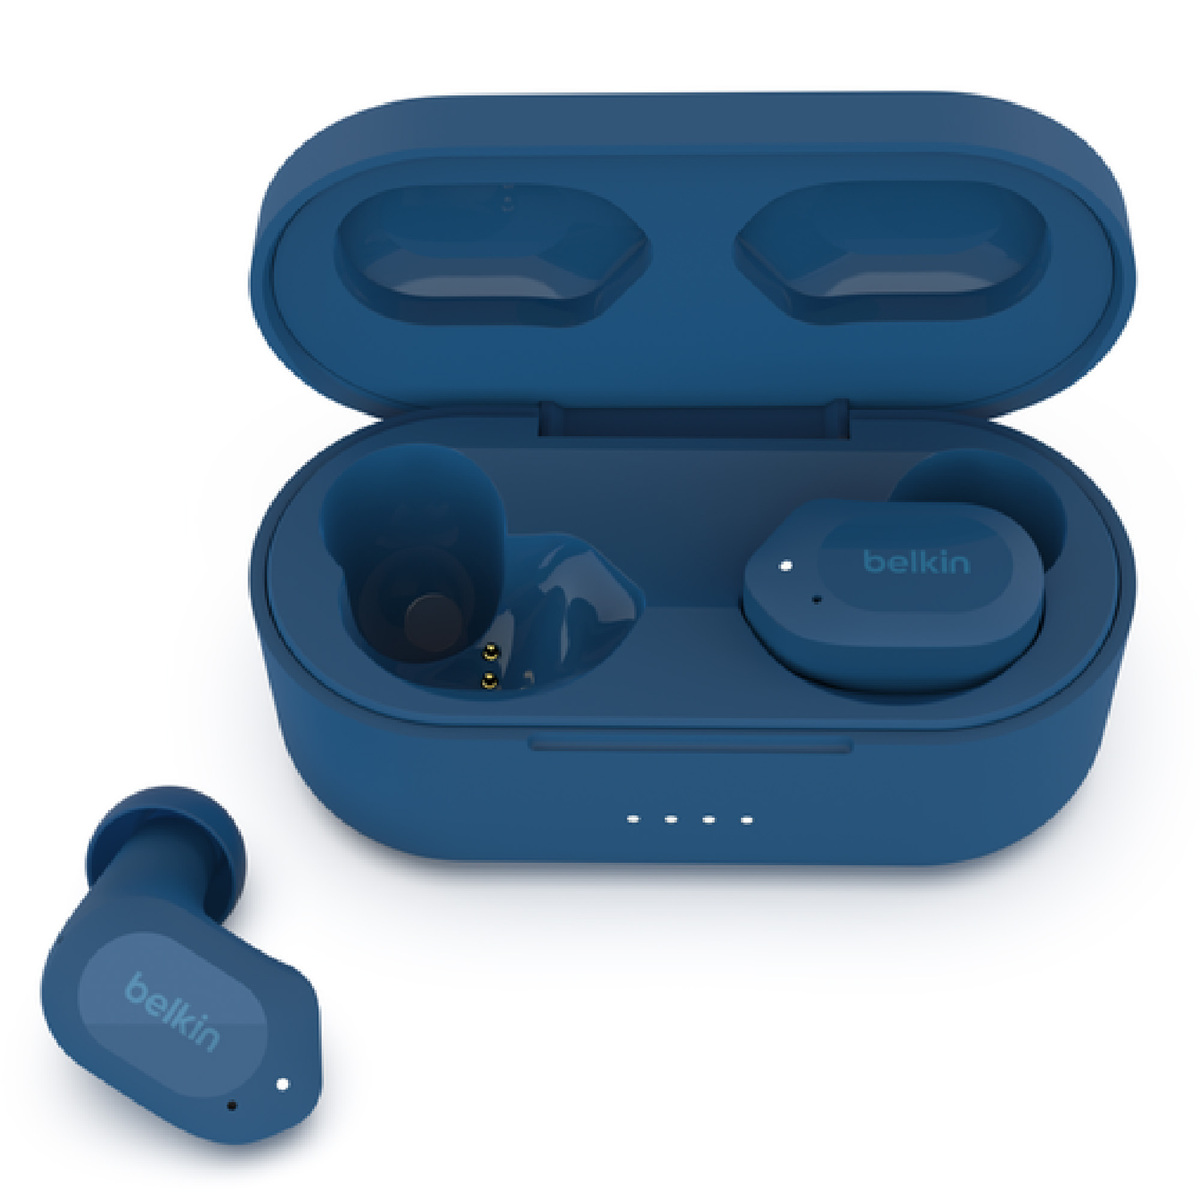 Belkin SOUNDFORM (TWS-C005)True Wireless Earbuds (Bluetooth Headphones with Noise Isolation, Touch Controls, 24 Hours Playtime, Sweatproof) Wireless Headphones, Bluetooth Earbuds,Blue